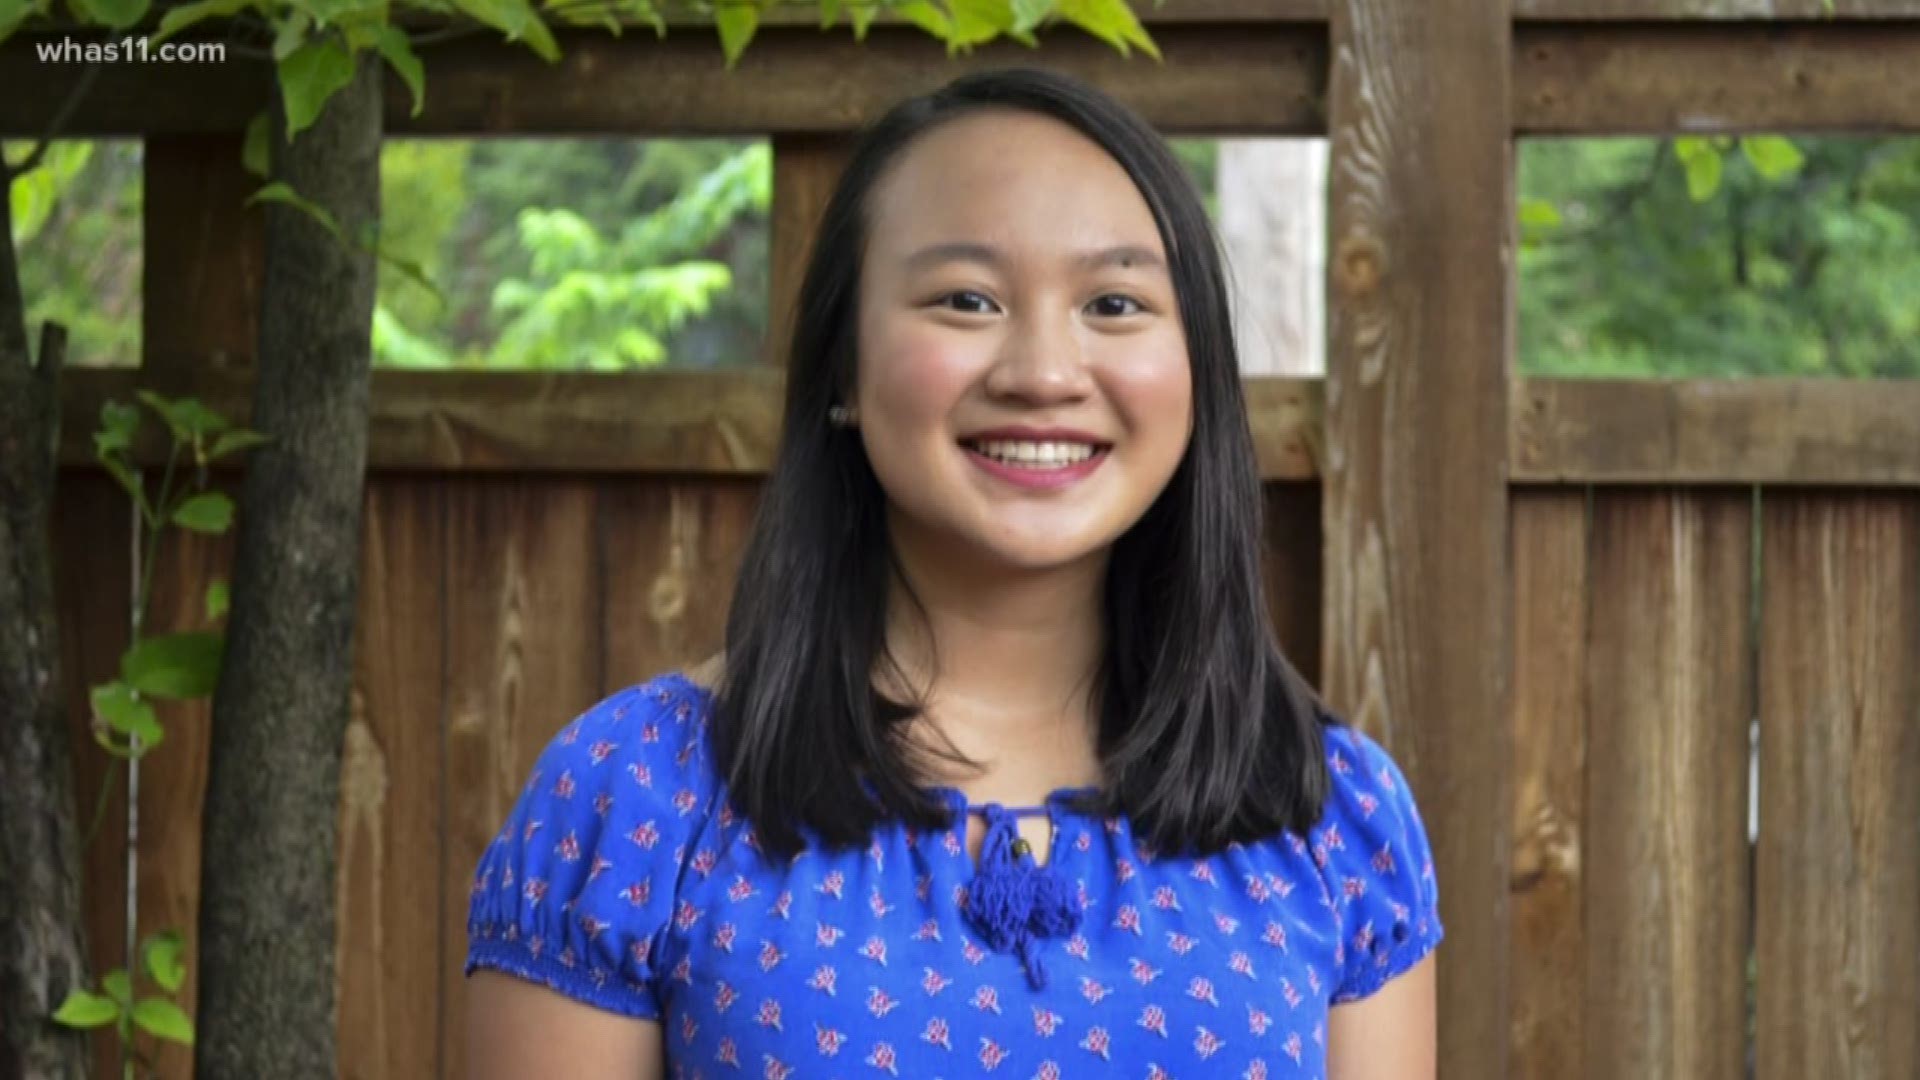 Allison Tu founded the group StAMINA, the Student Alliance for Mental Health Innovation and Action, to get rid of any stigma around mental health.